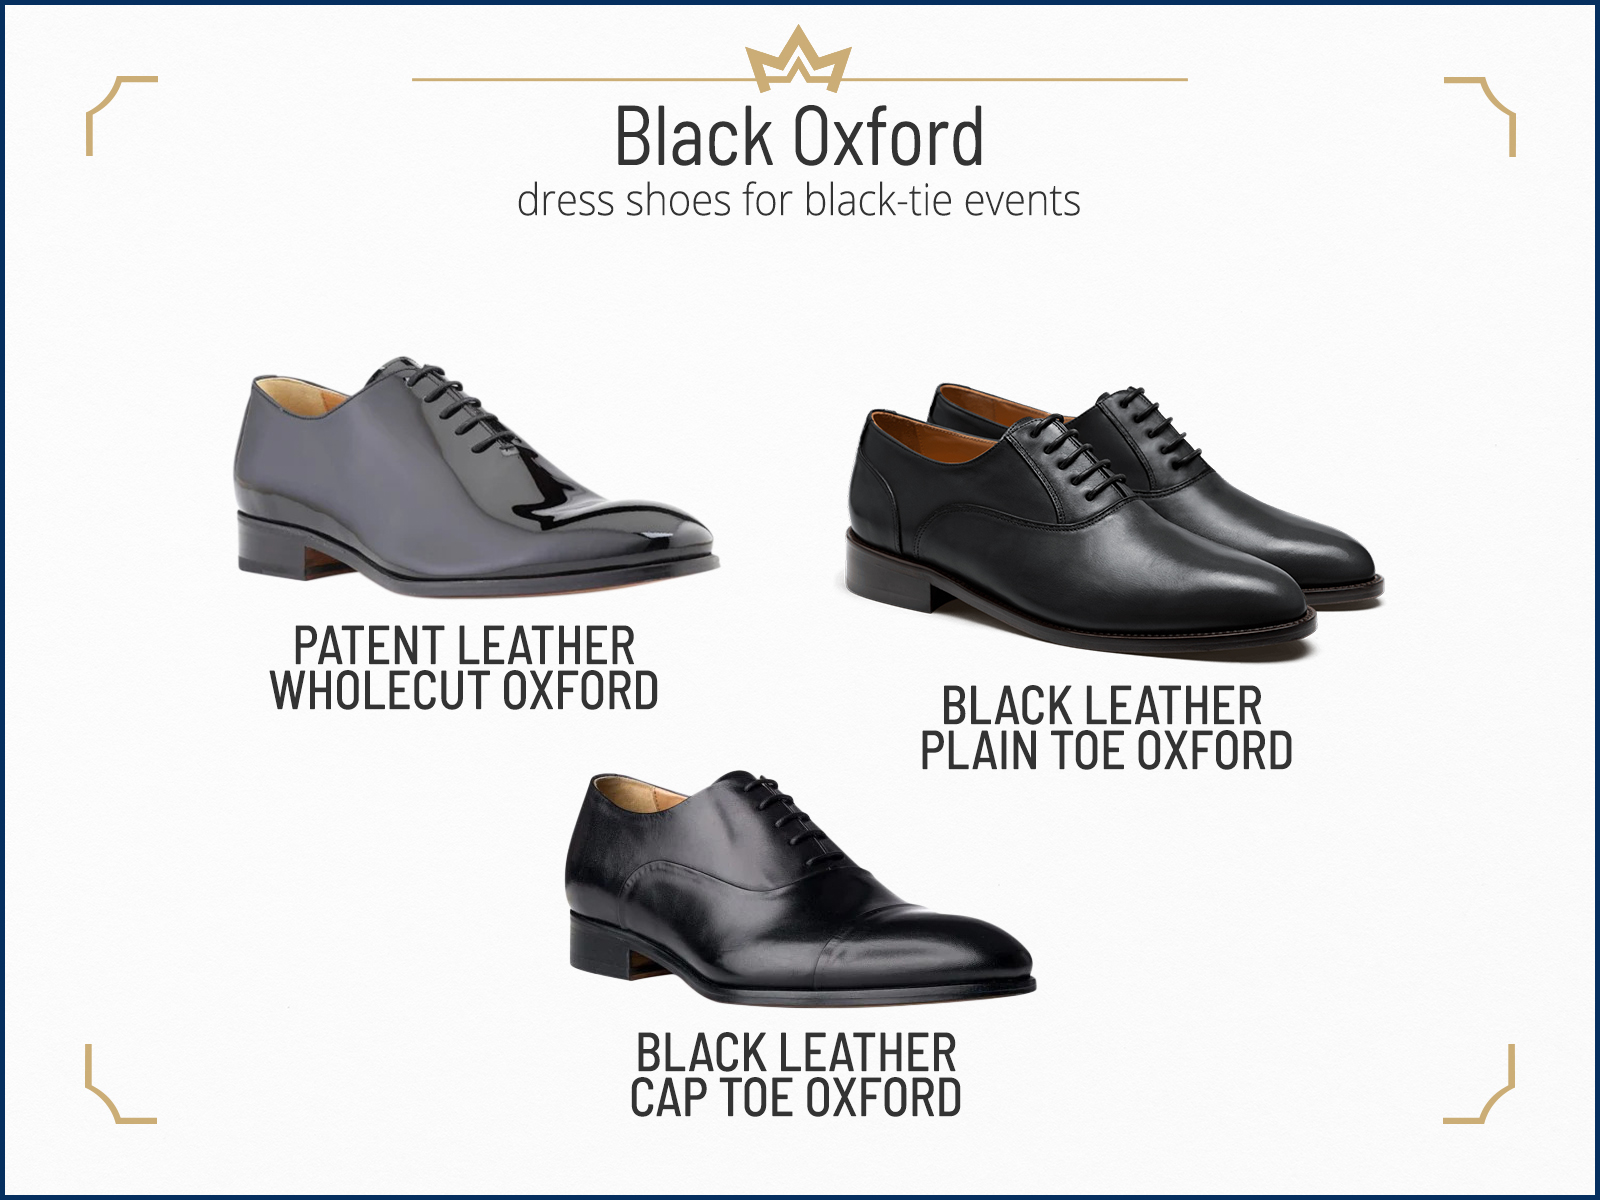 Black oxford dress shoe styles for black-tie events